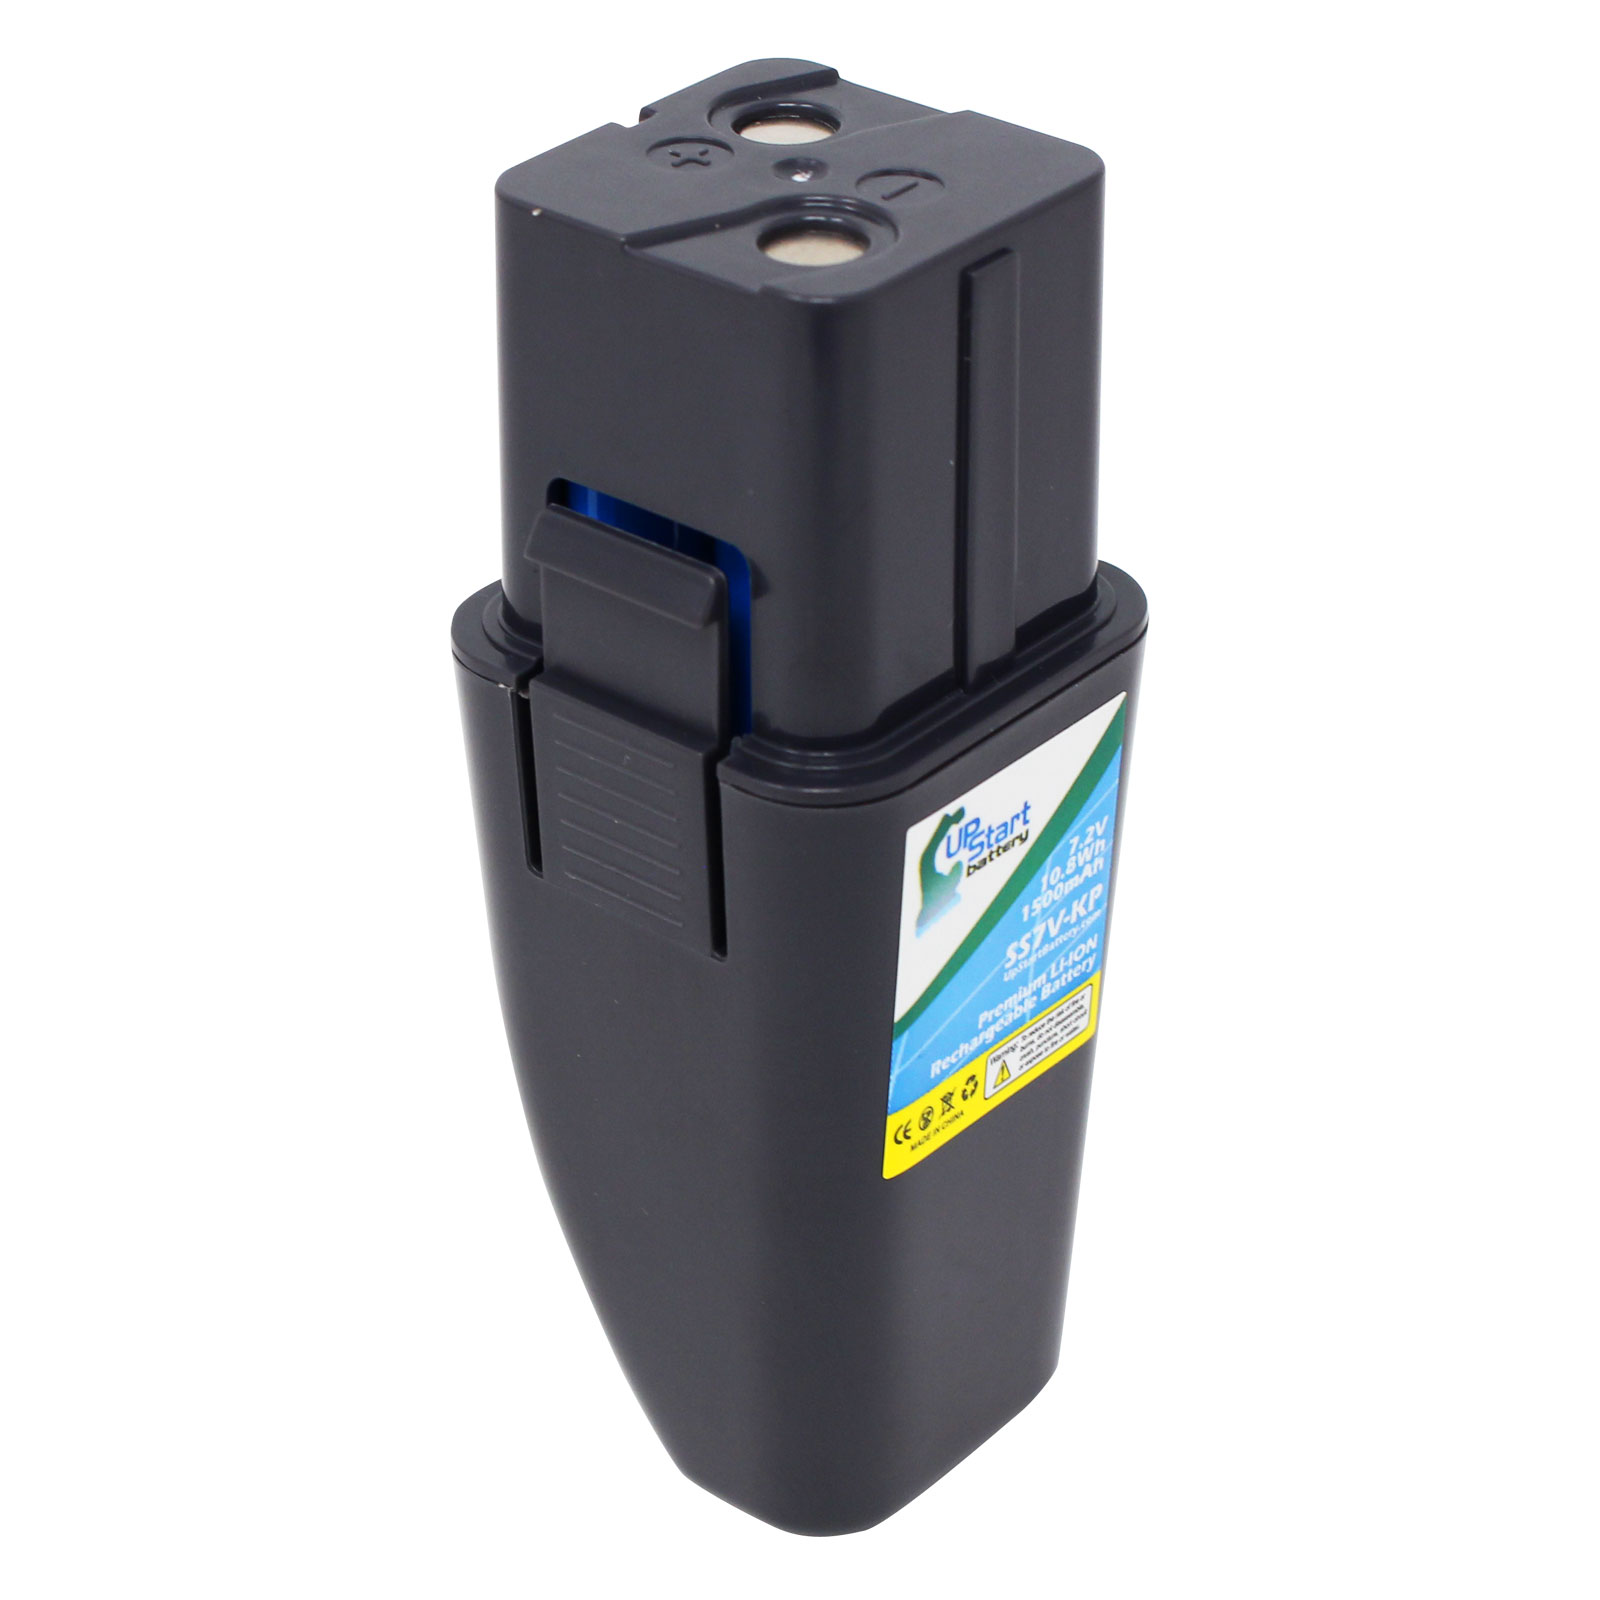 UpStart Battery Replacement Battery for Ontel Swivel Sweeper G2 - Compatible with Ontel RU-RBG Battery (7.2V, NIMH, 1500mAh)